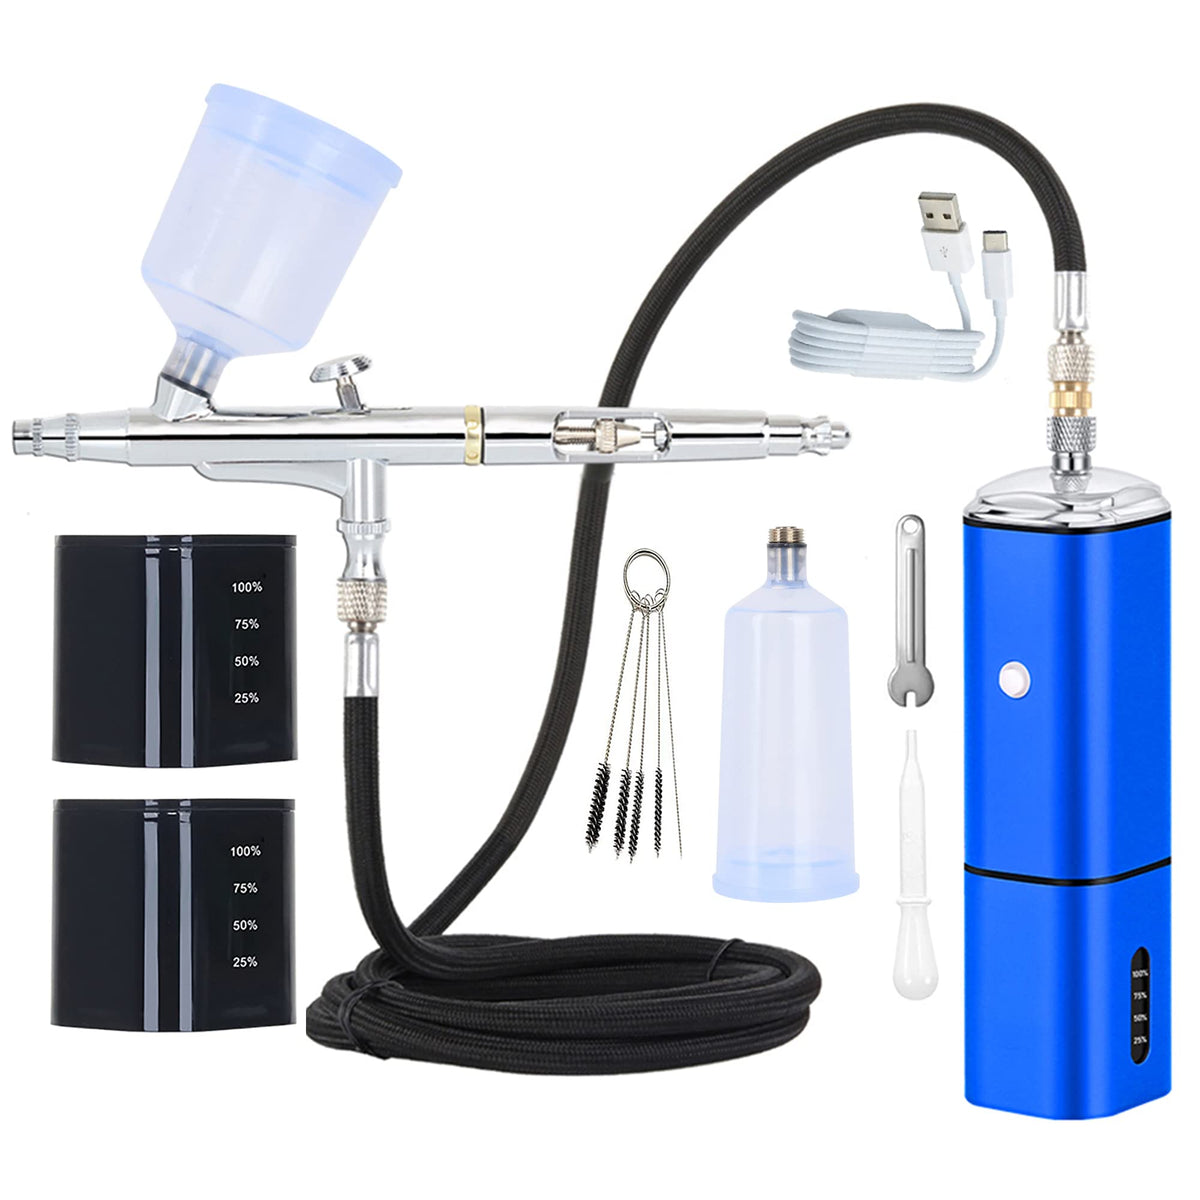 Airbrush Rechargeable Cordless Airbrush-Kit Compressor - 30PSI High  Pressure Airbrush Gun with Hose Wireless Air Brush for Model